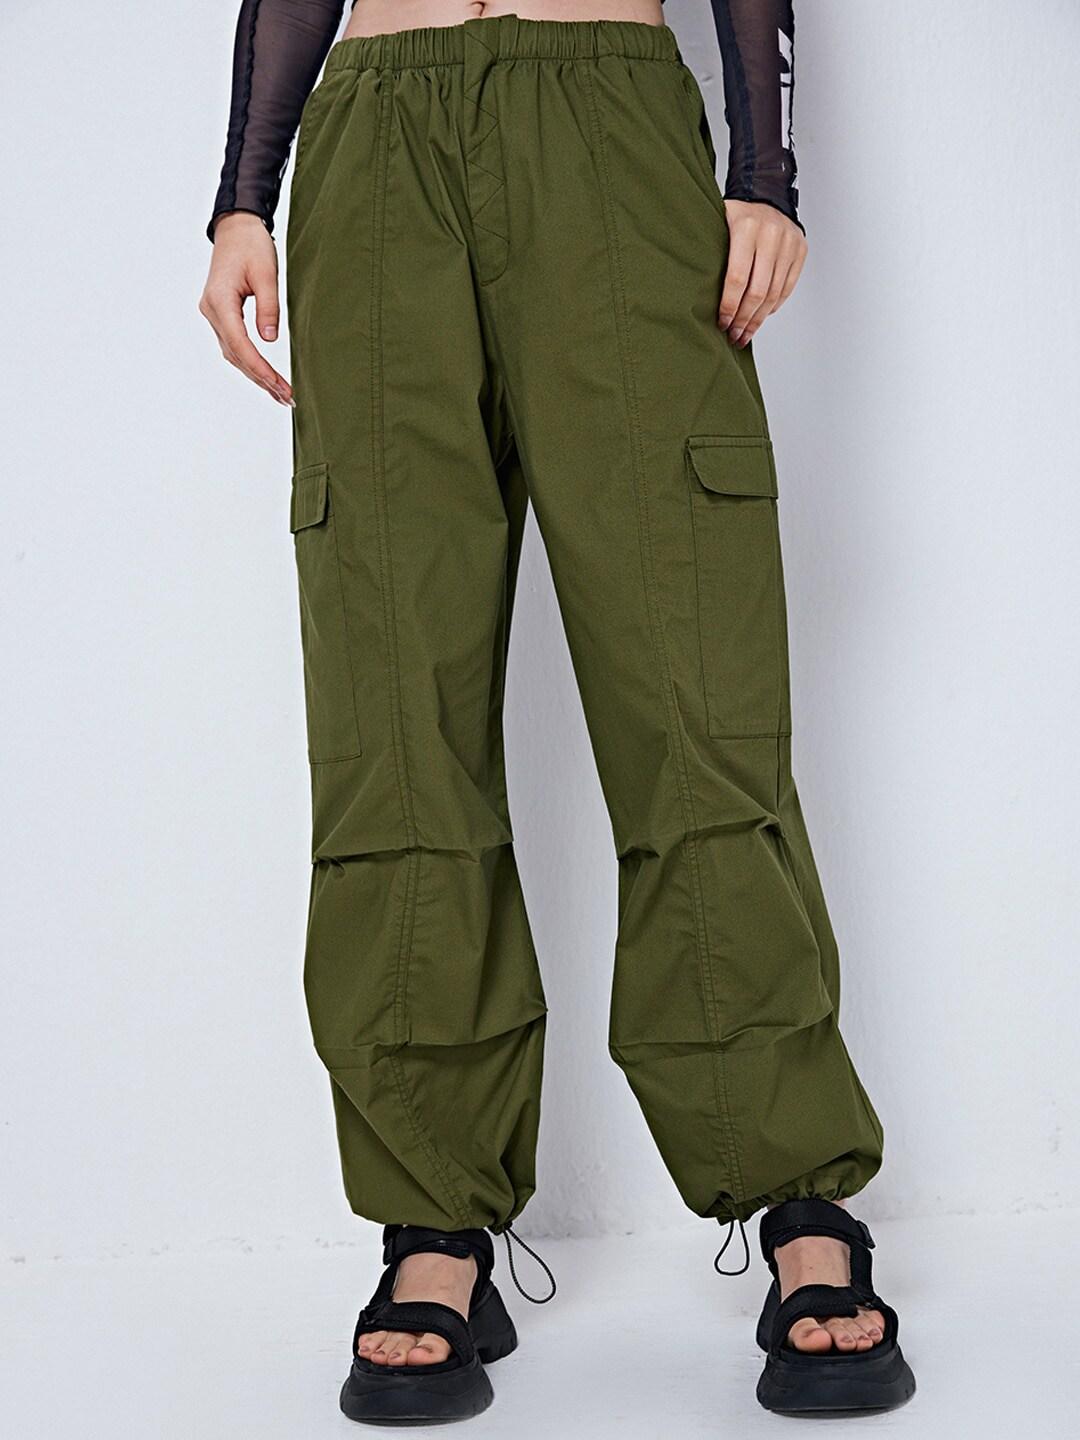 cover story women olive green mid rise loose fit cargos trousers